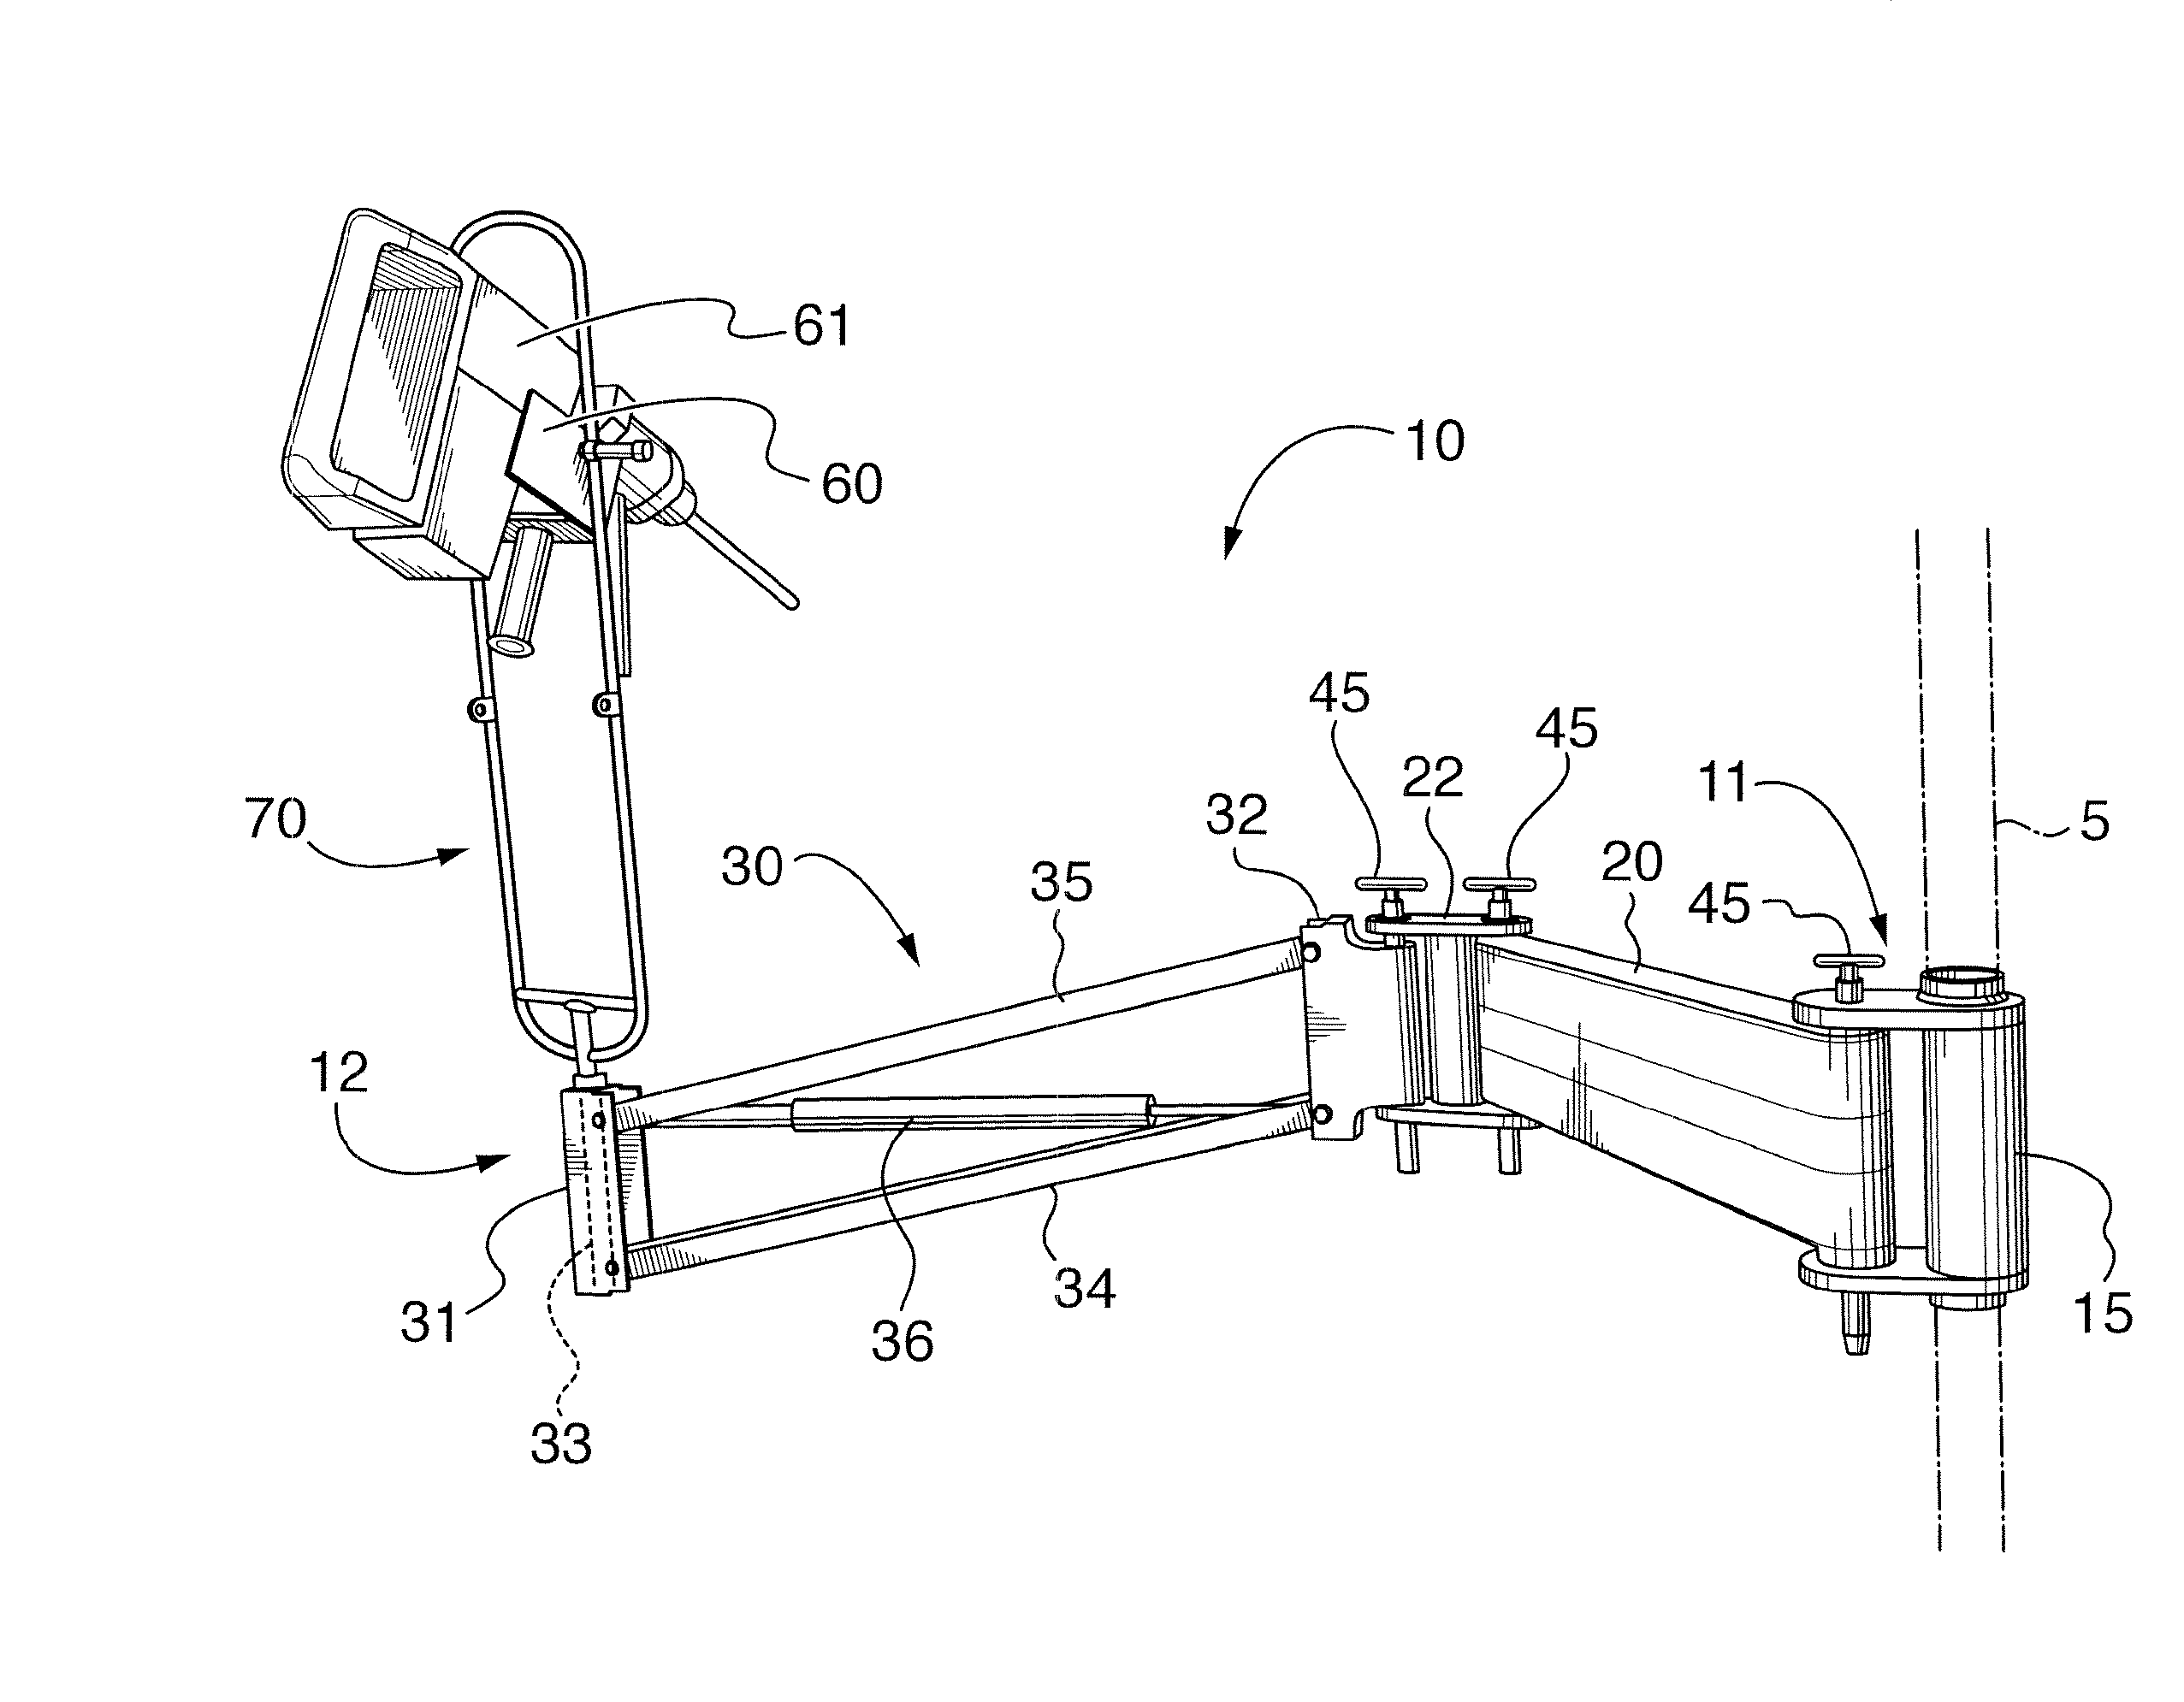 Portable articulationg tool support